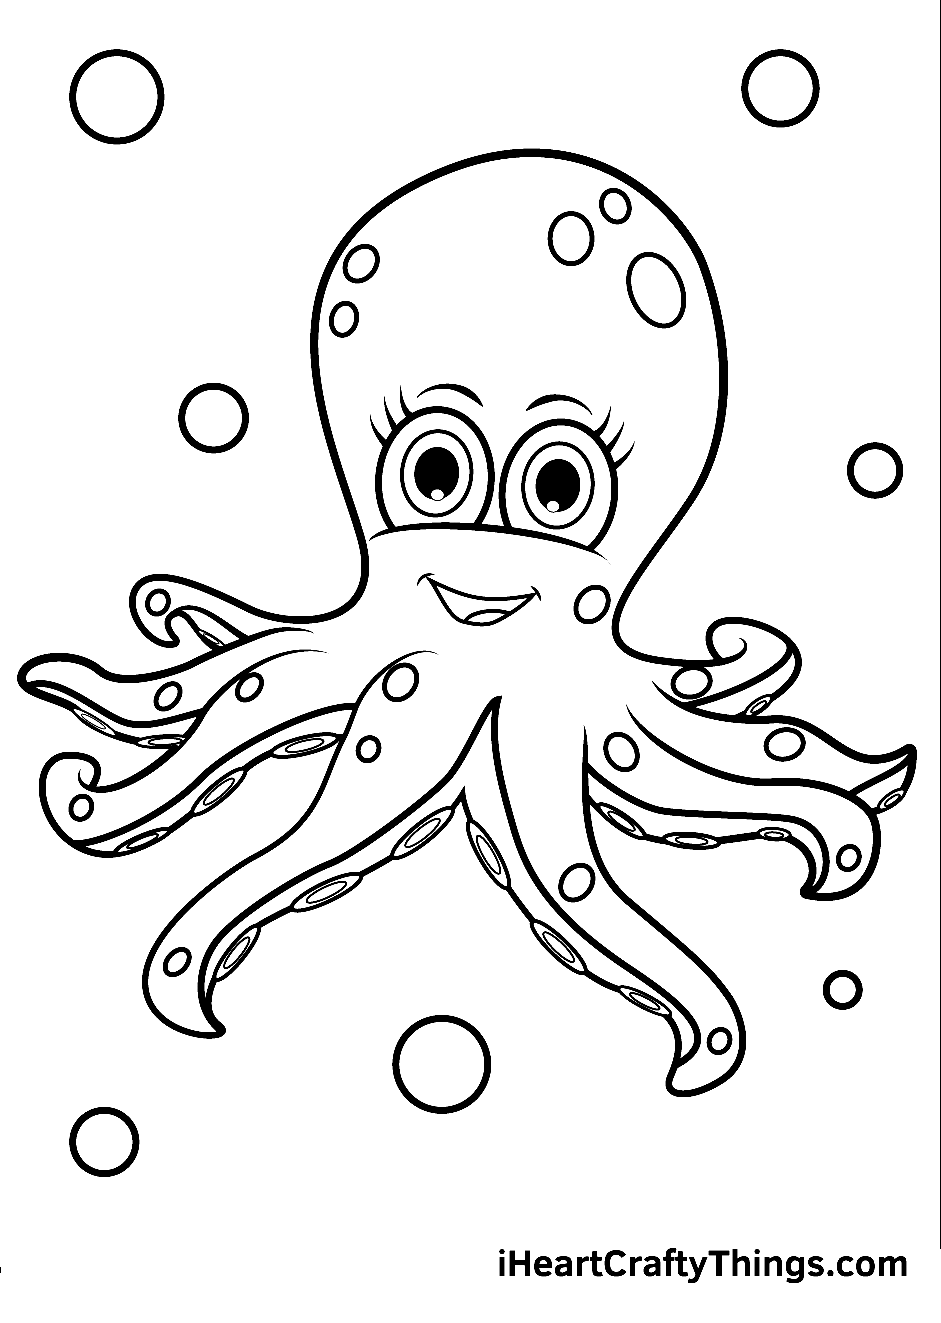 Smiling Octopus Coloring Pages